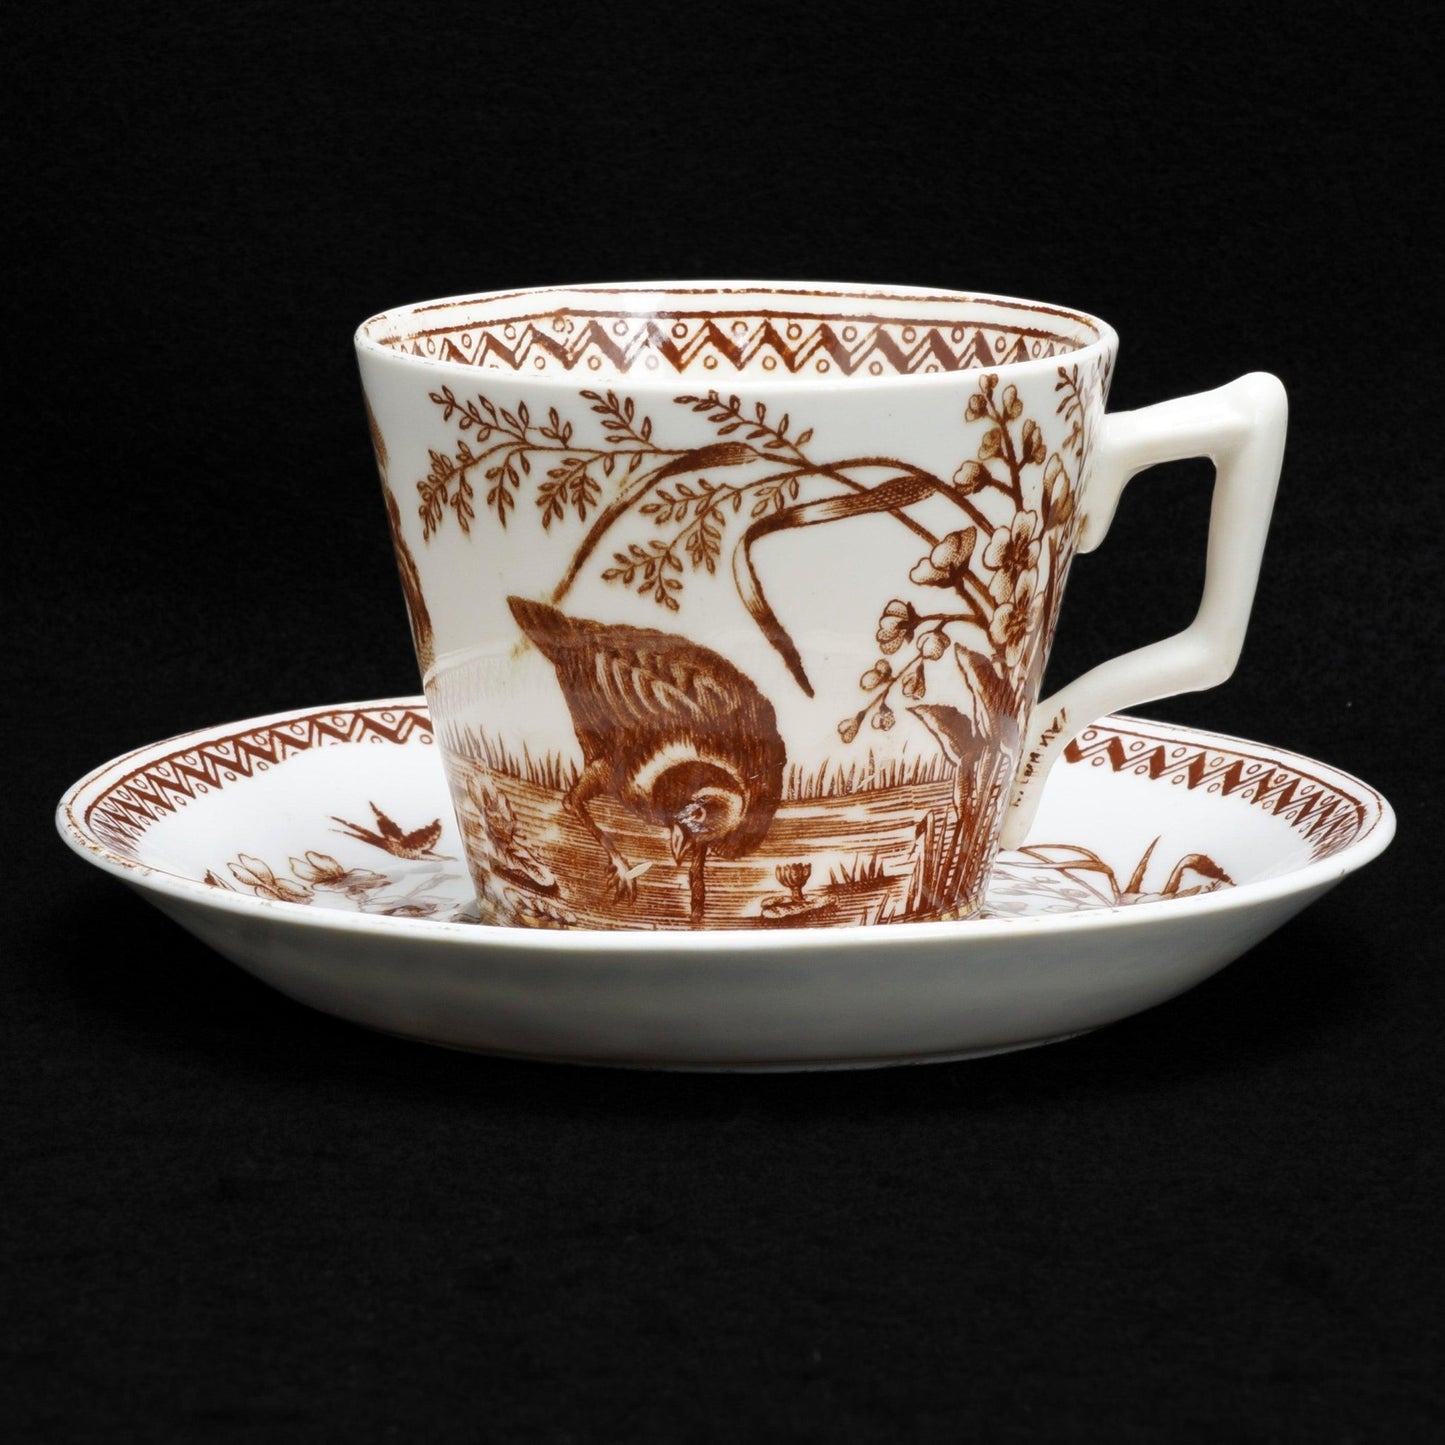 Charles Allerton & Sons Staffordshire Transferware Water Hen Teacup and Saucer Late 19th Century - Bear and Raven Antiques